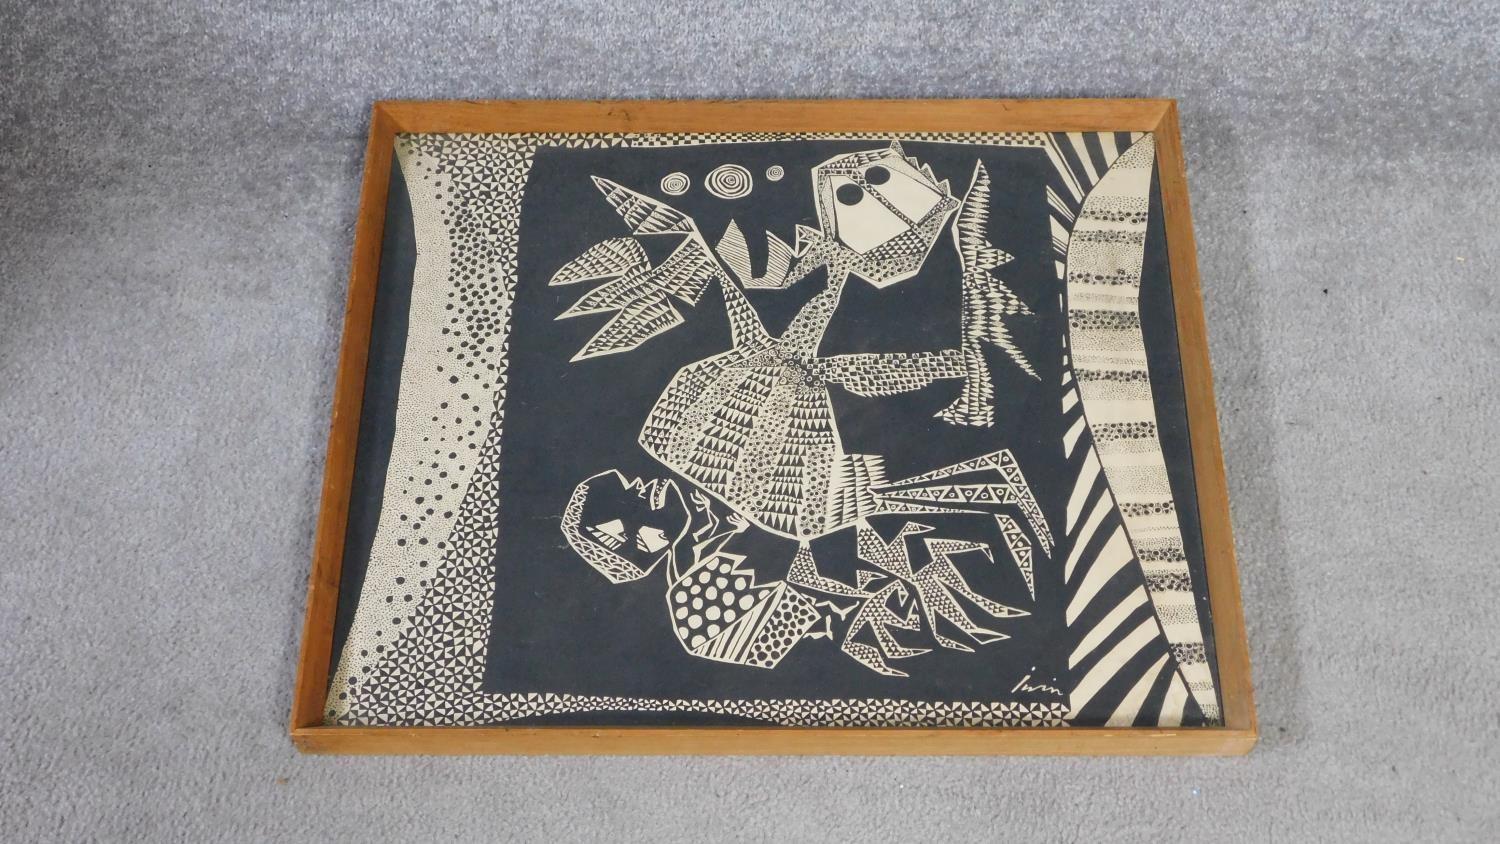 A framed and glazed screen print by Austro-Nigeria artist Chief Susanne Wenger MFR, also known as